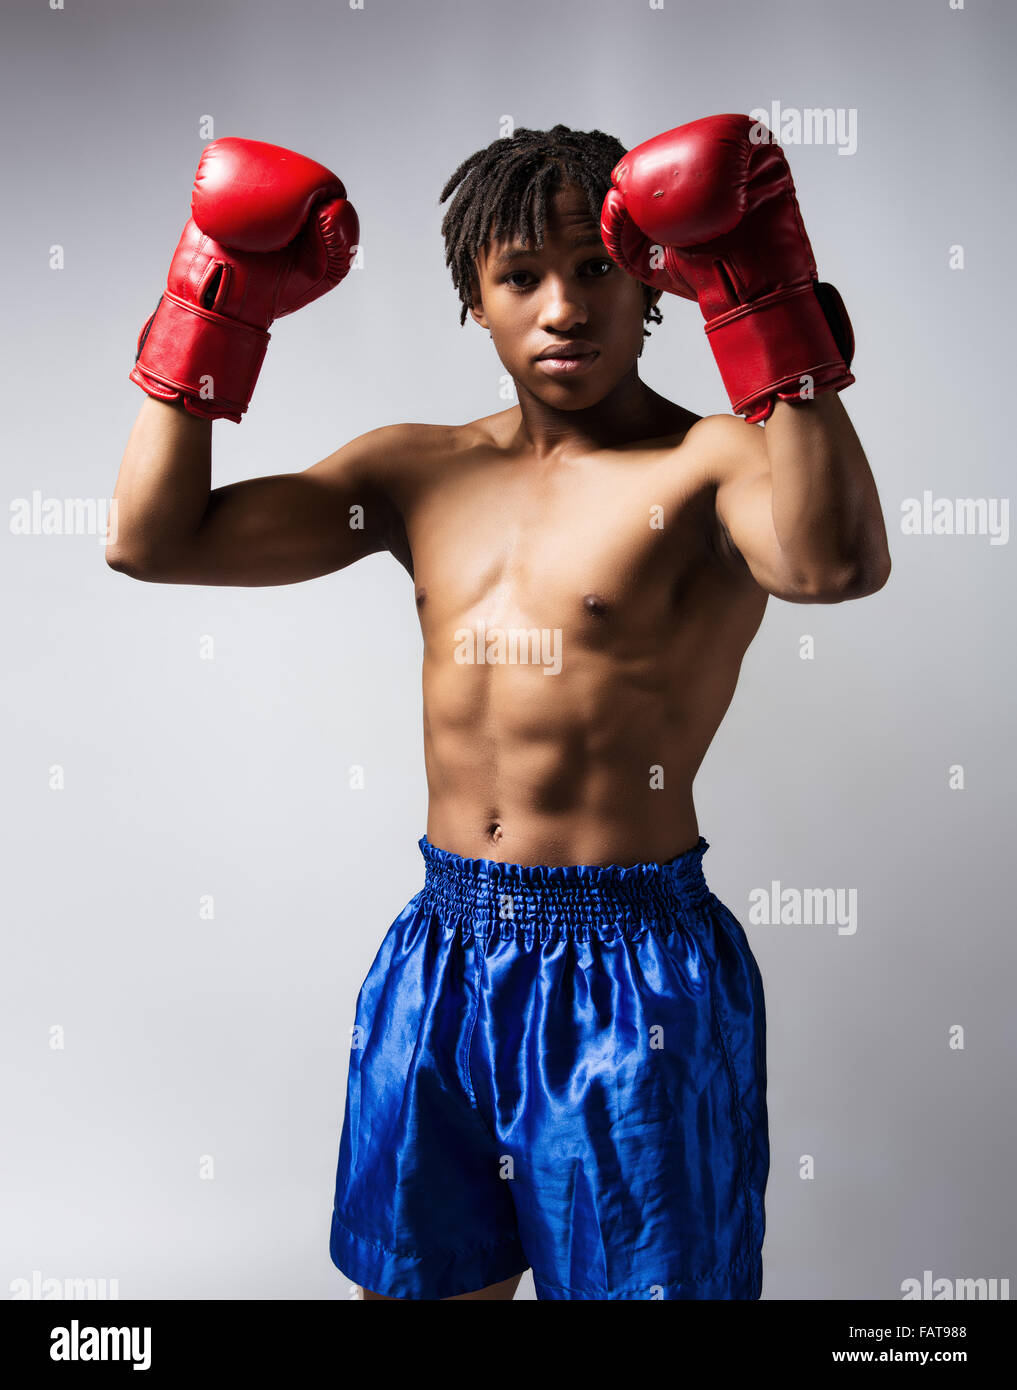 Young muscular athletic male boxer wearing blue boxing shorts and